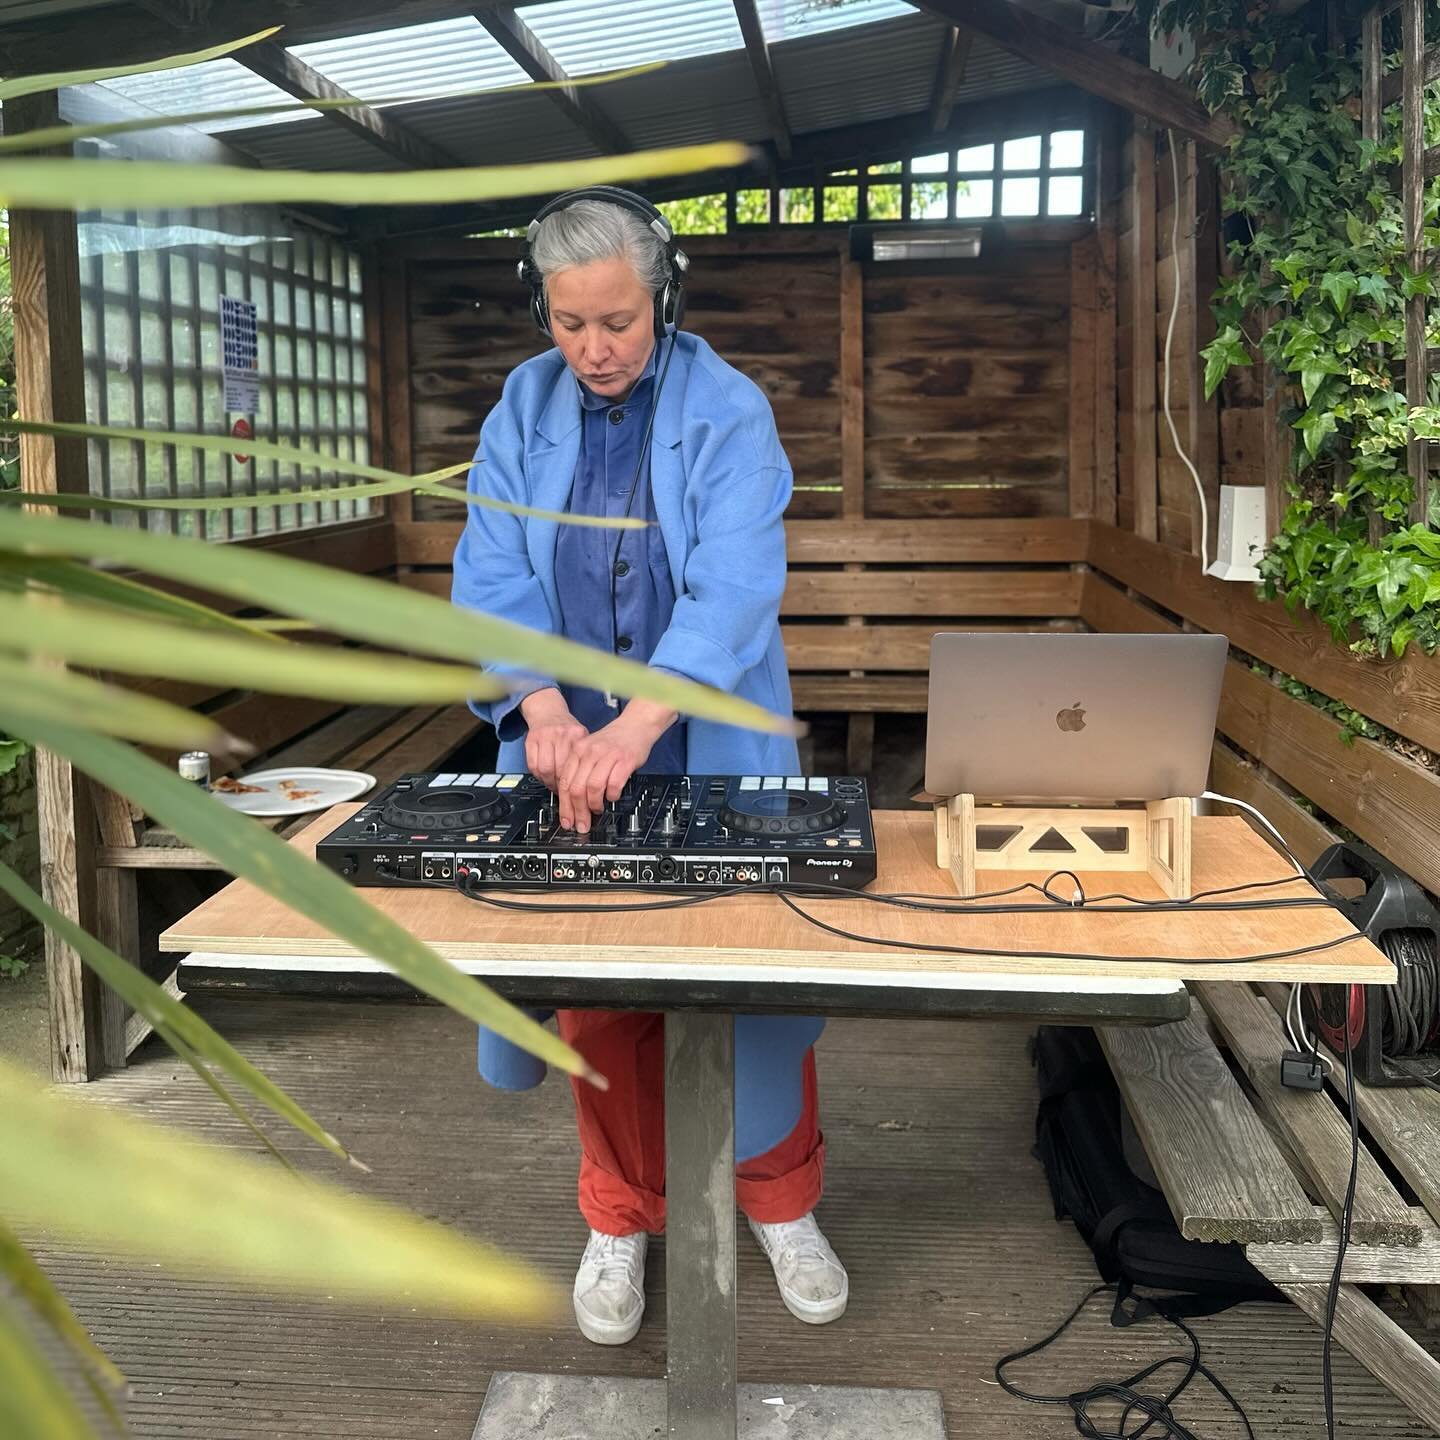 Saturday Sessions coming up this Weekend! 🎶🍕🍻

3-8pm 🎹🎵

Woodfired Pizza open from 3pm 🍕

.
.
.

#saturdaysession #saturday #saturdayvibes #music #musicinthecourtyard #framlingham #suffolk #woodfired #woodfiredoven #woodfiredpizza #visiteastofe